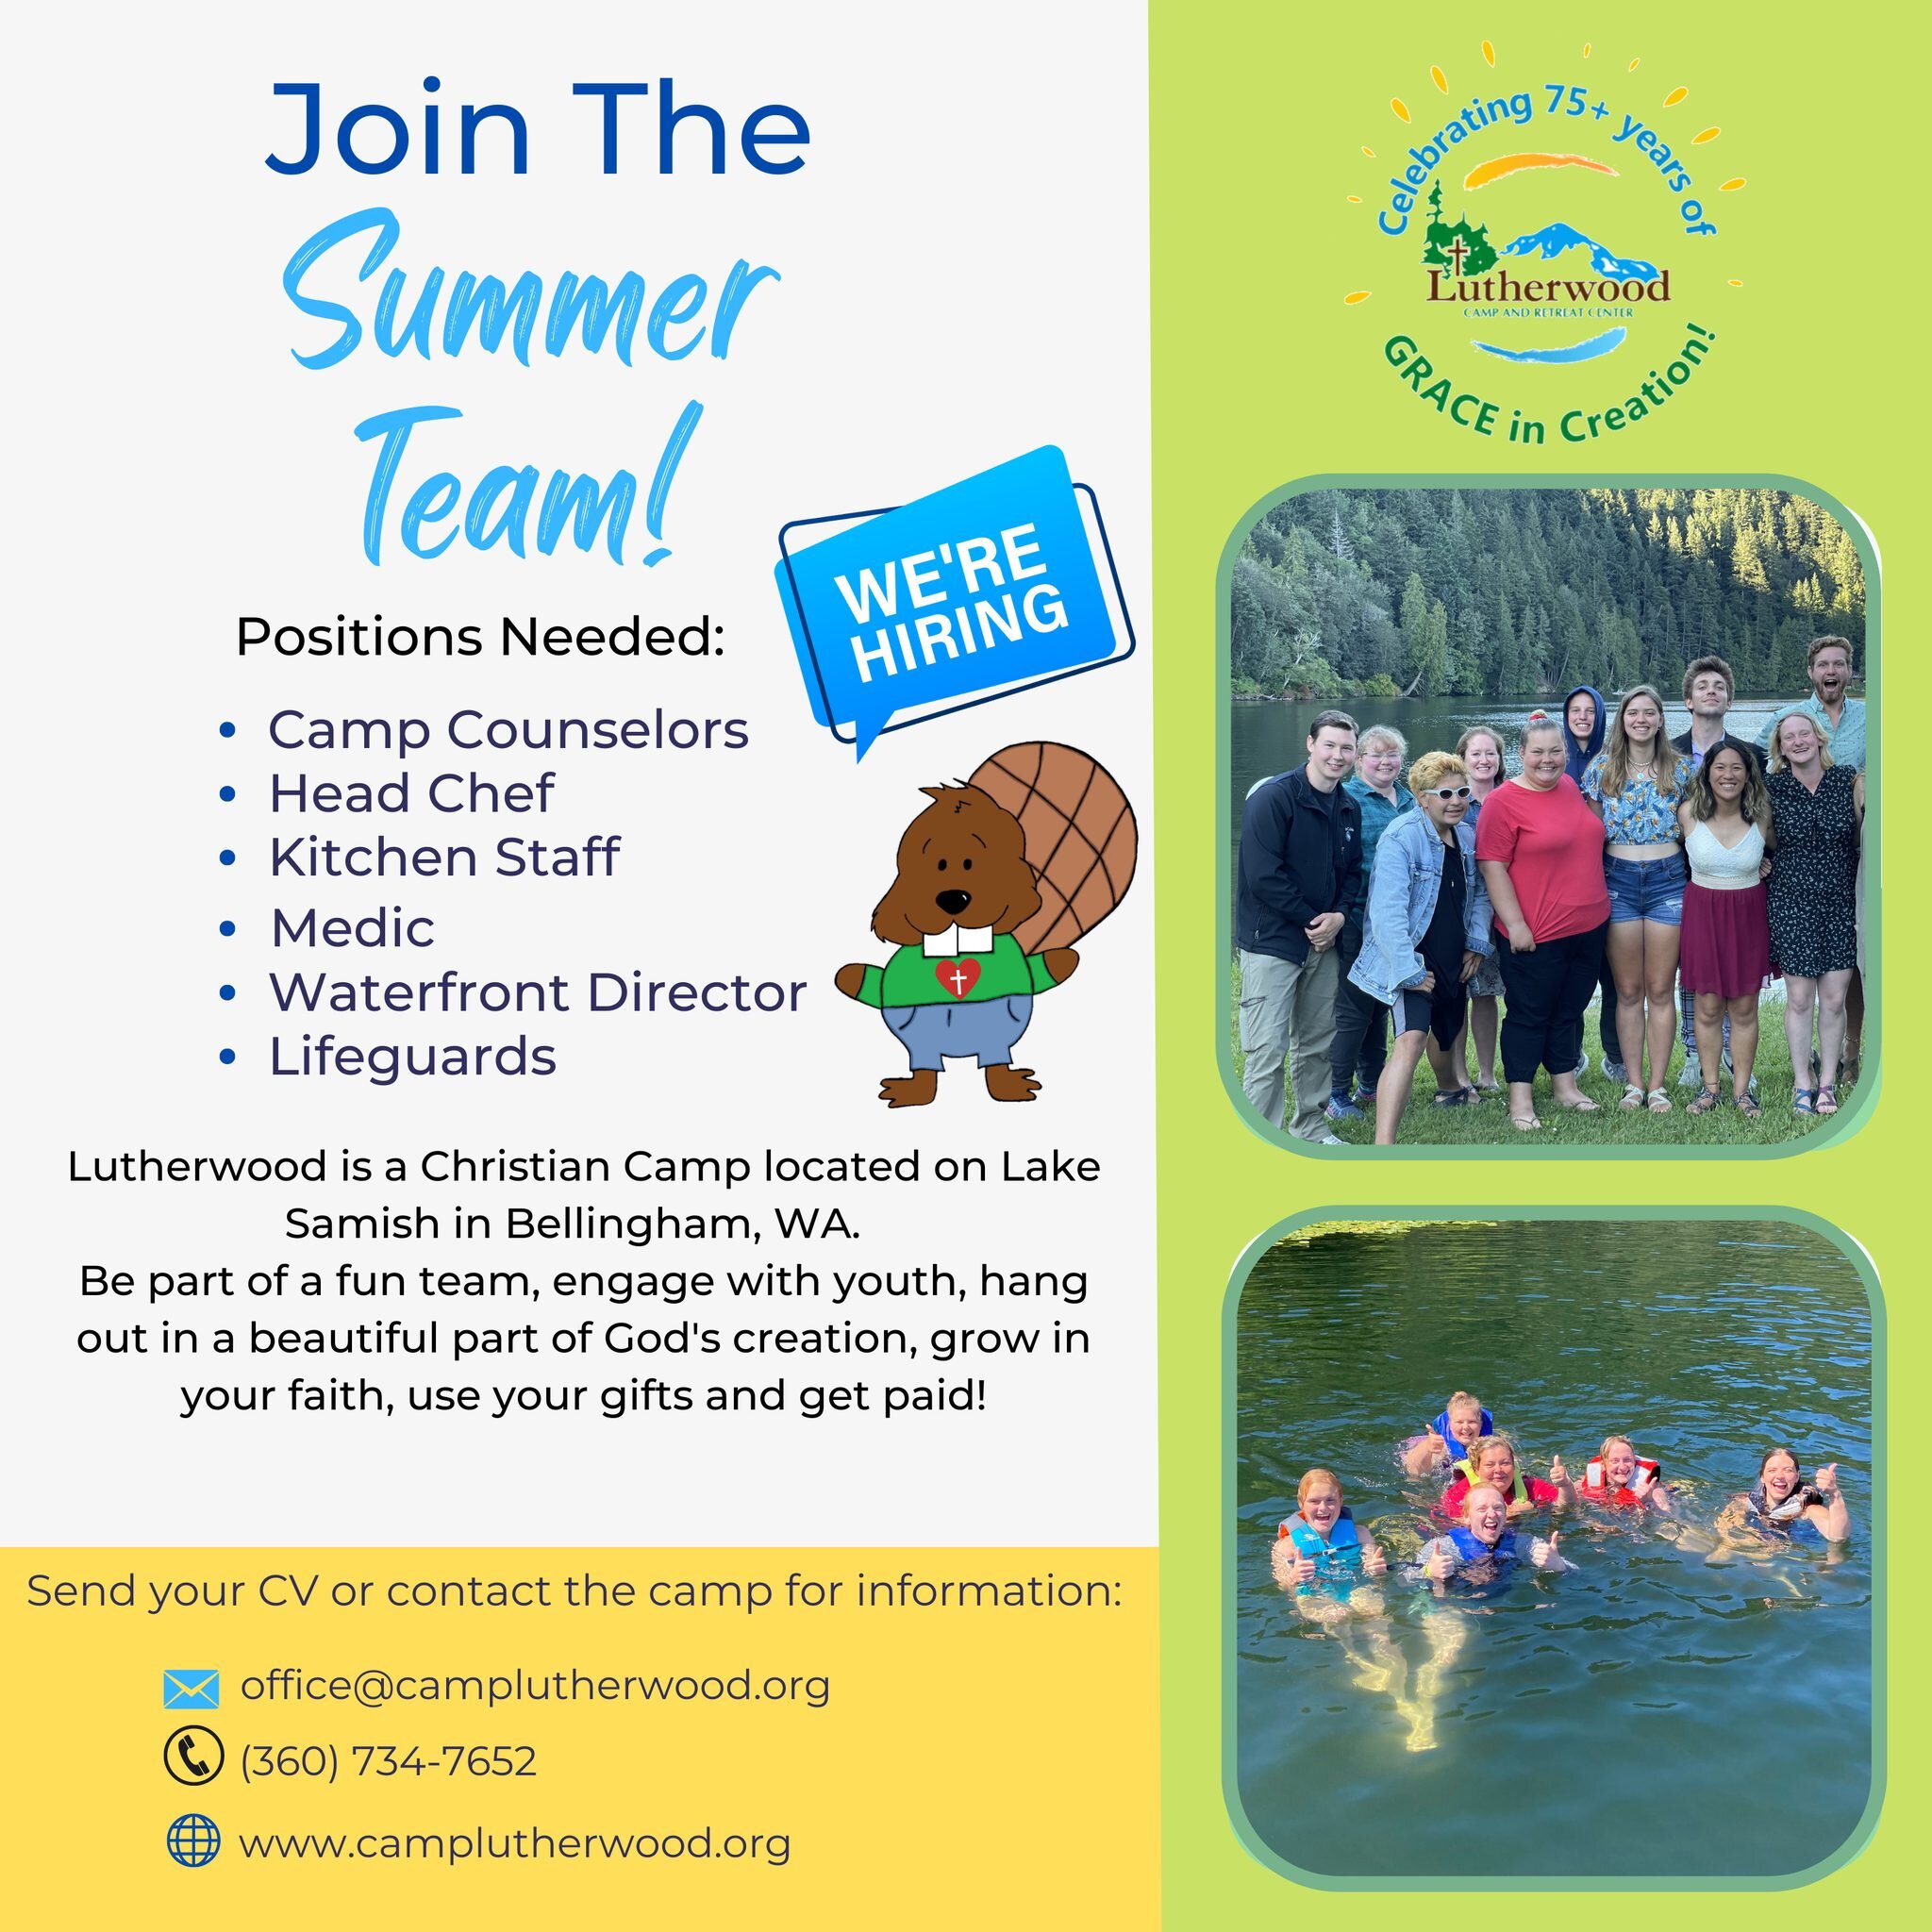 Come work at Lutherwood this summer! Be part of a fun team, engage with youth, hang out in a beautiful part of God's creation, grow in your faith, use your gifts, and get paid! More information can be found on the camp website www.camplutherwood.org/